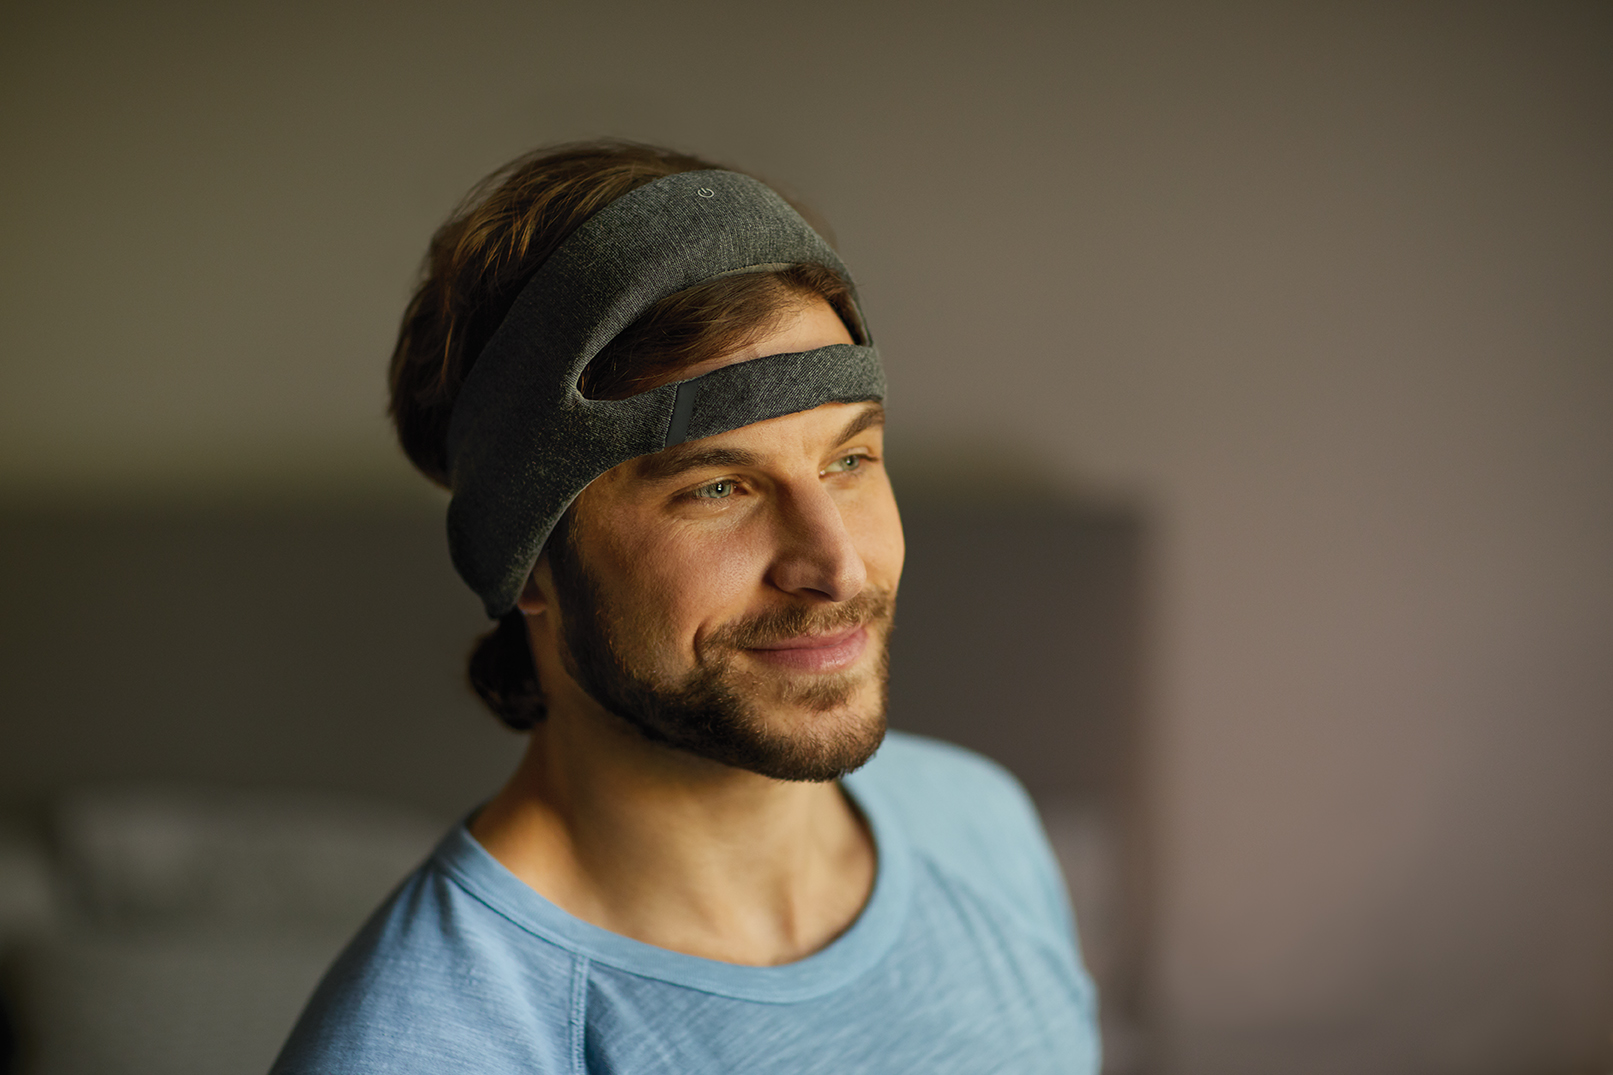 The Philips SmartSleep headset emits tonal frequencies to help you get the most out of your sleep. (Cwenar Studios)